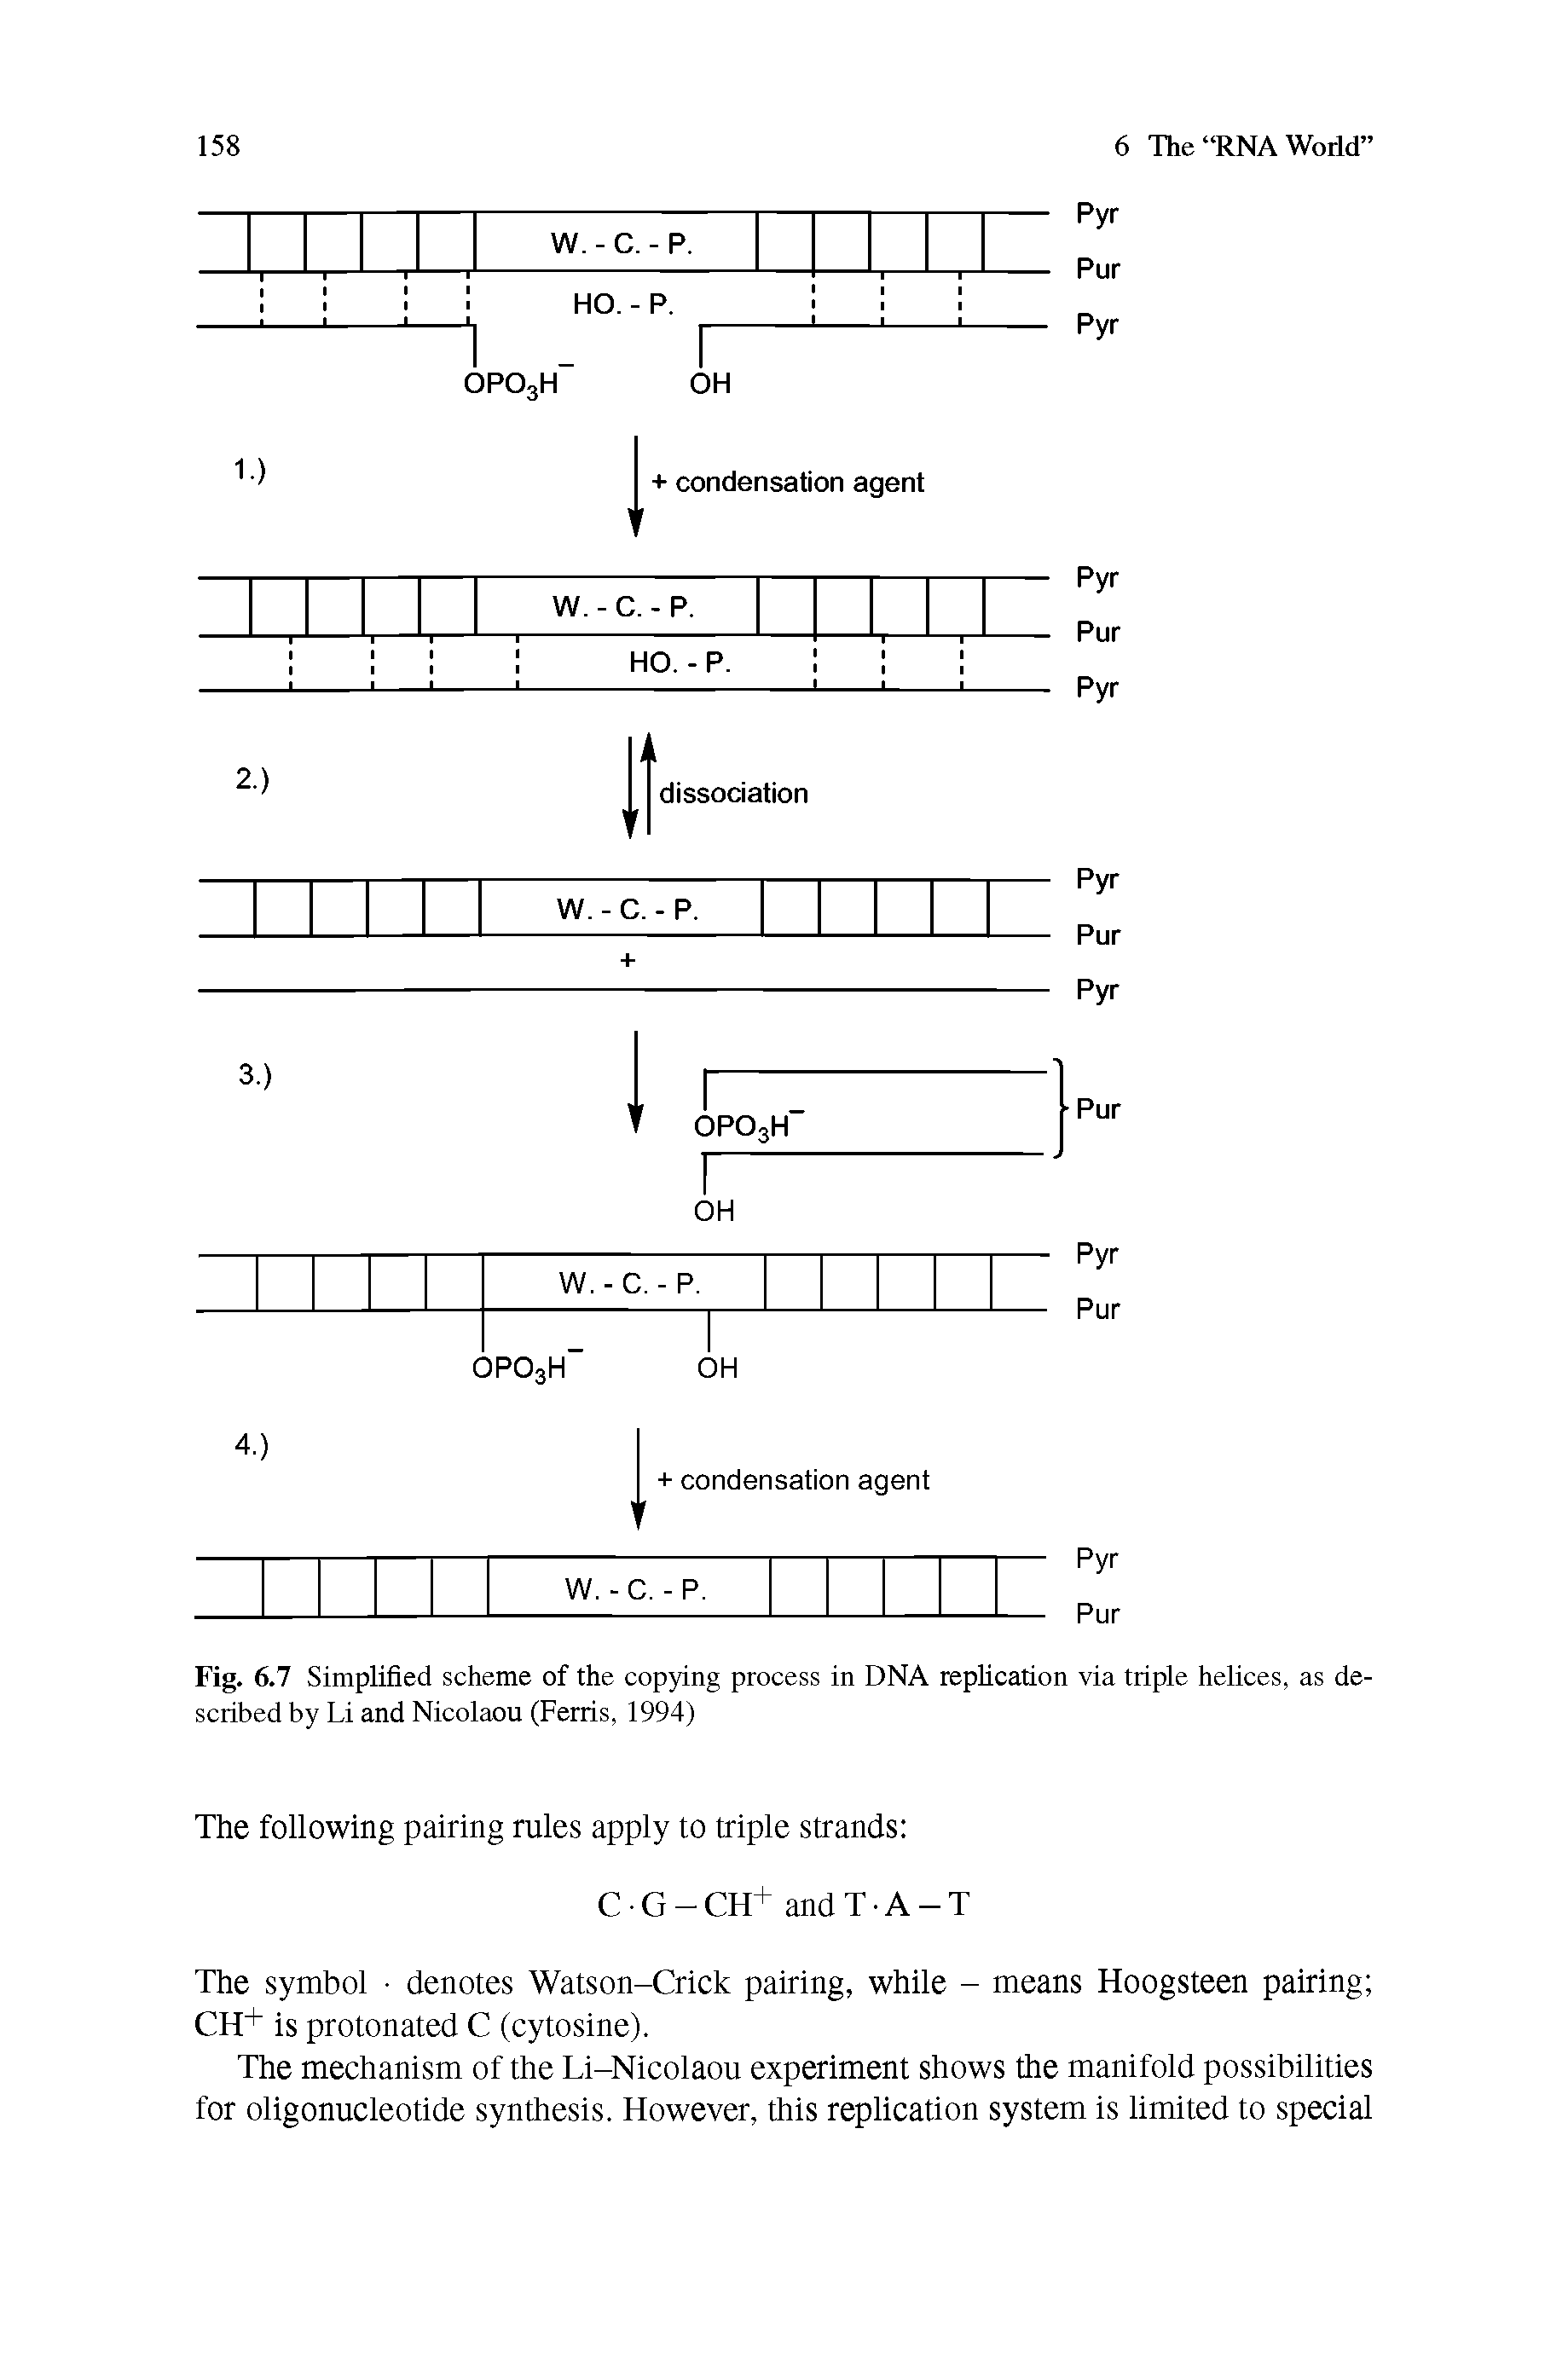 Fig. 6.7 Simplified scheme of the copying process in DNA replication via triple helices, as described by Li and Nicolaou (Ferris, 1994)...